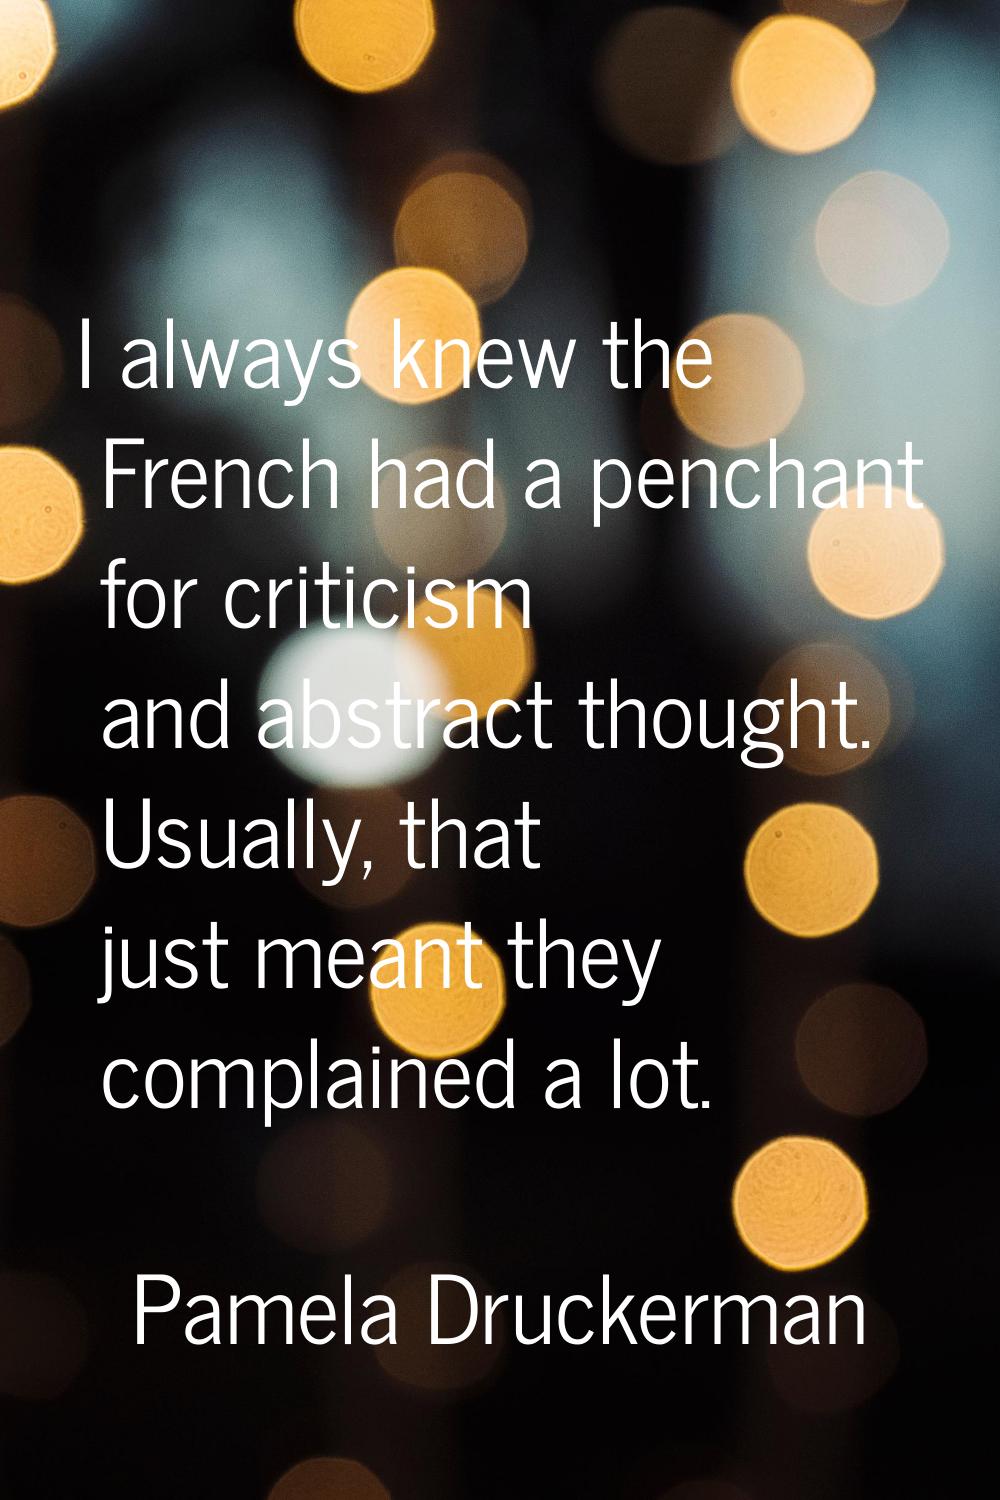 I always knew the French had a penchant for criticism and abstract thought. Usually, that just mean